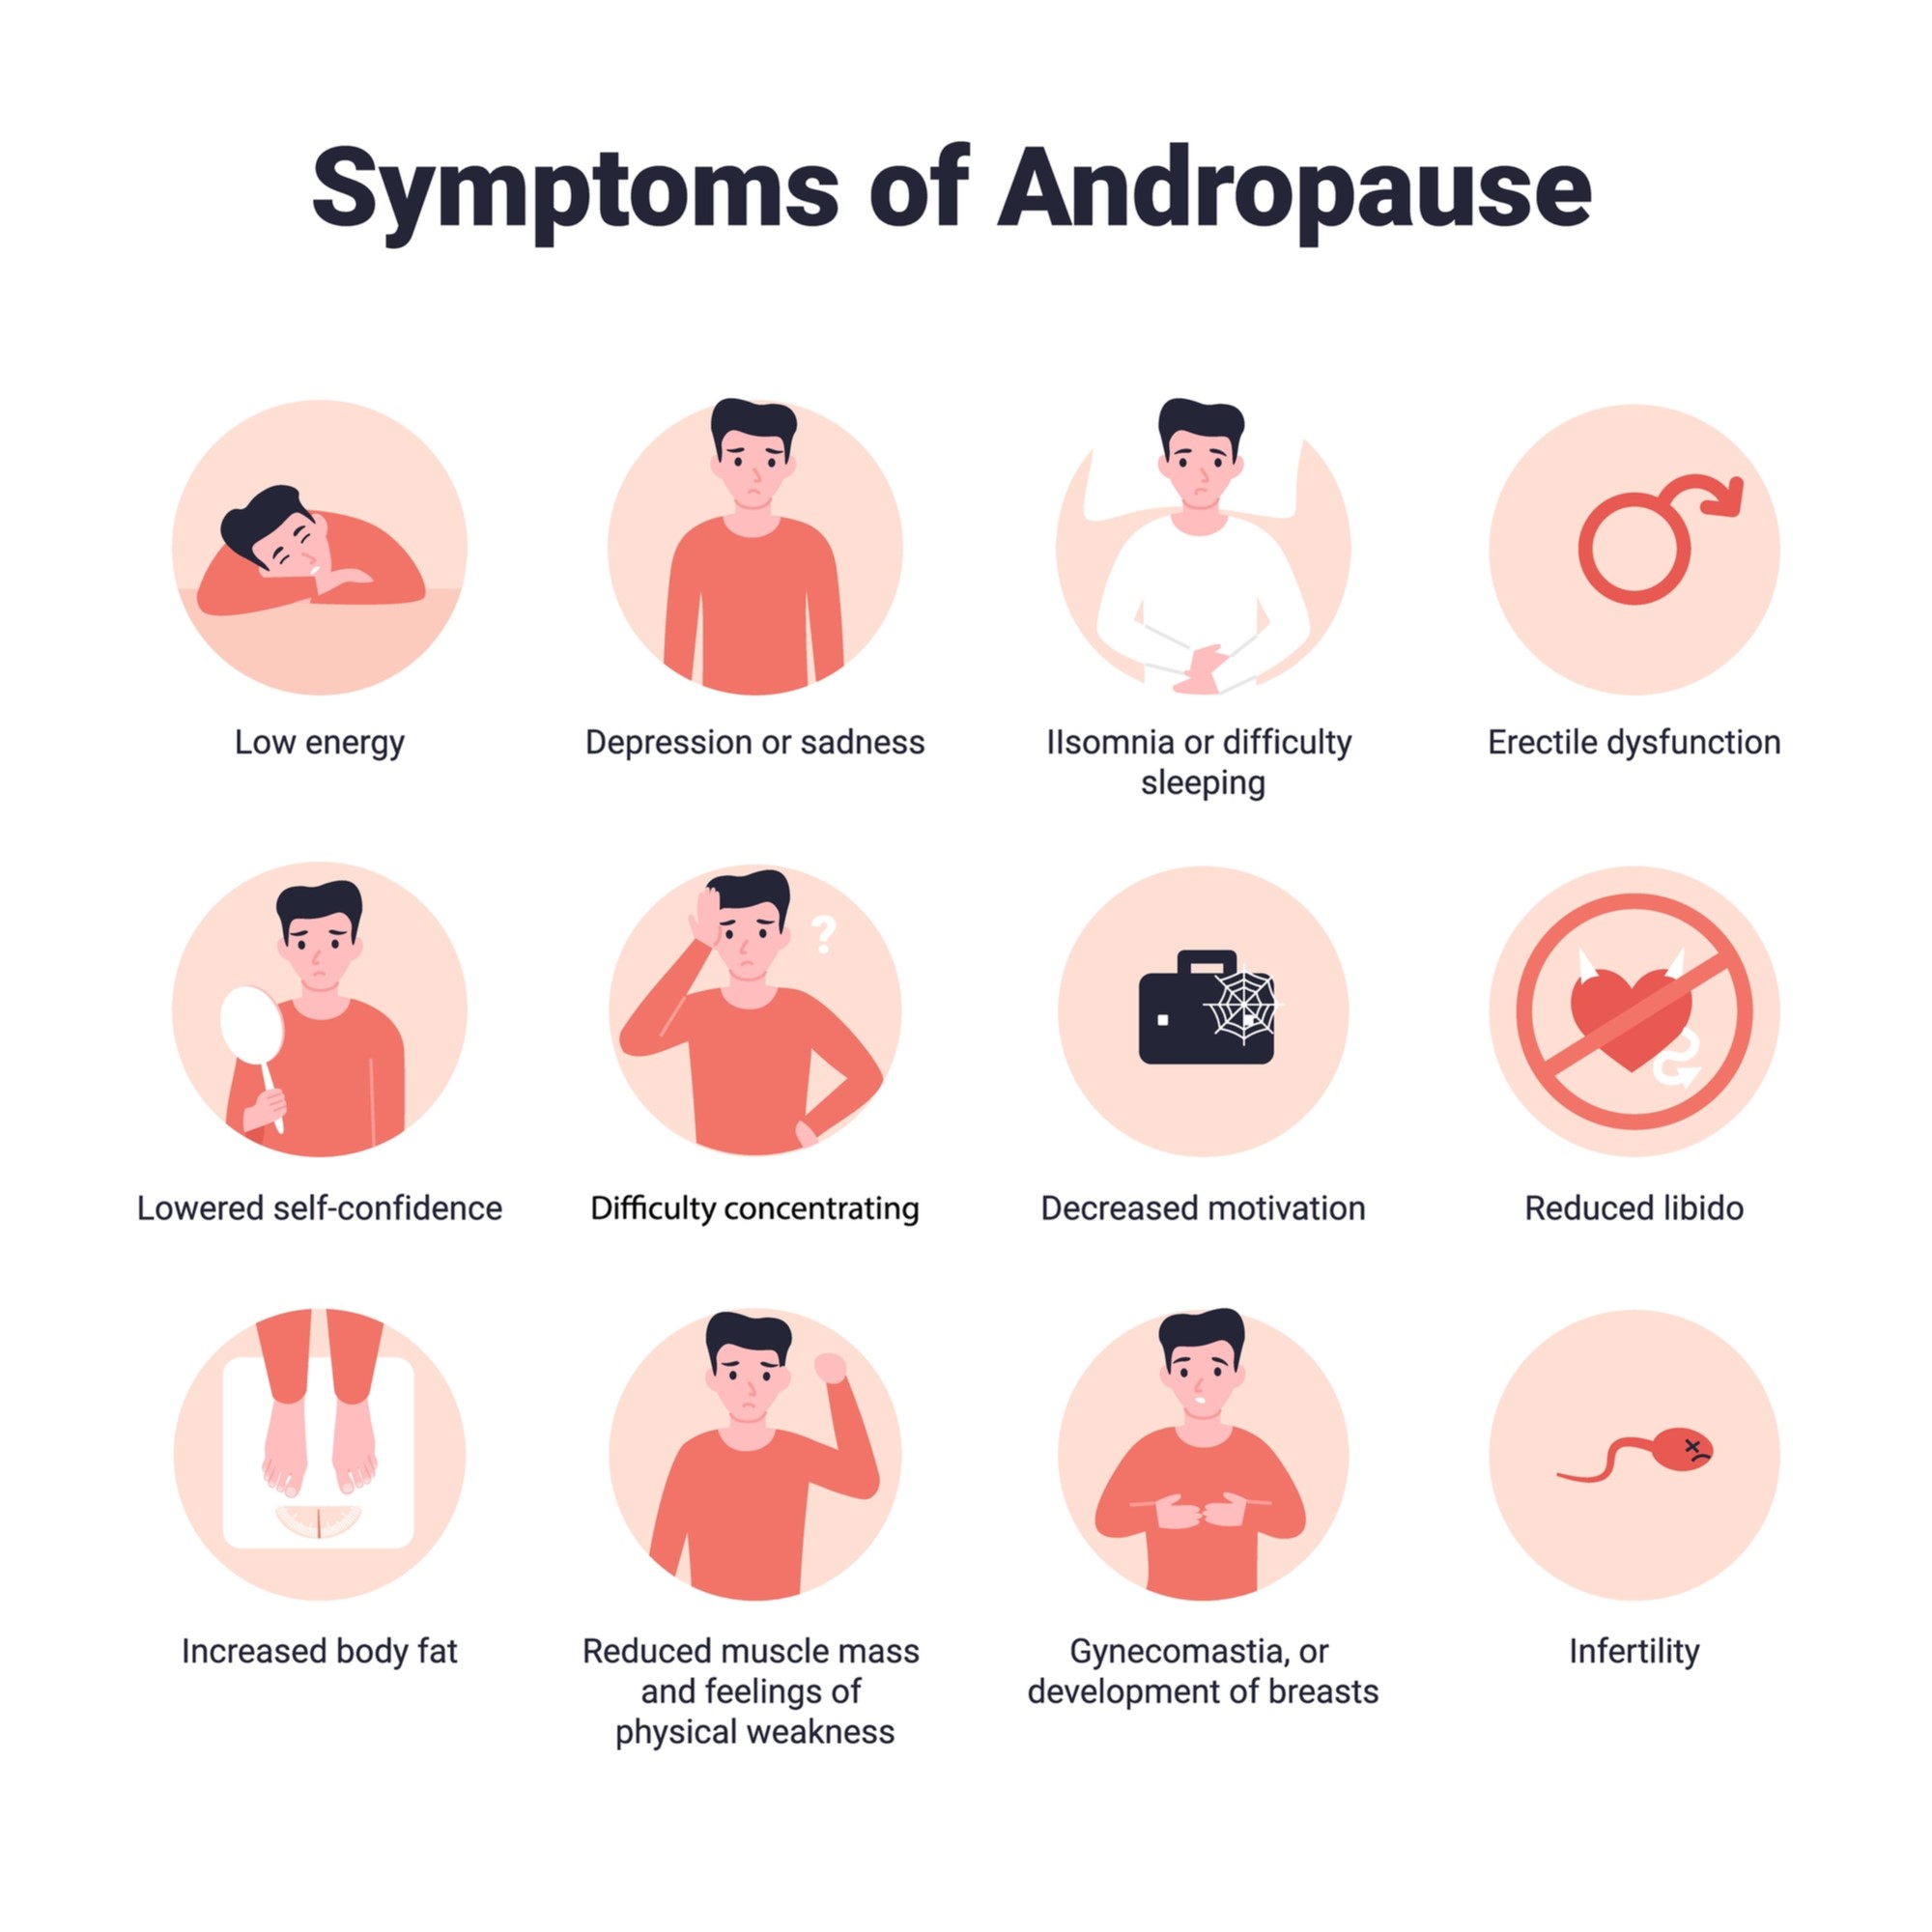 Symptoms of andropause